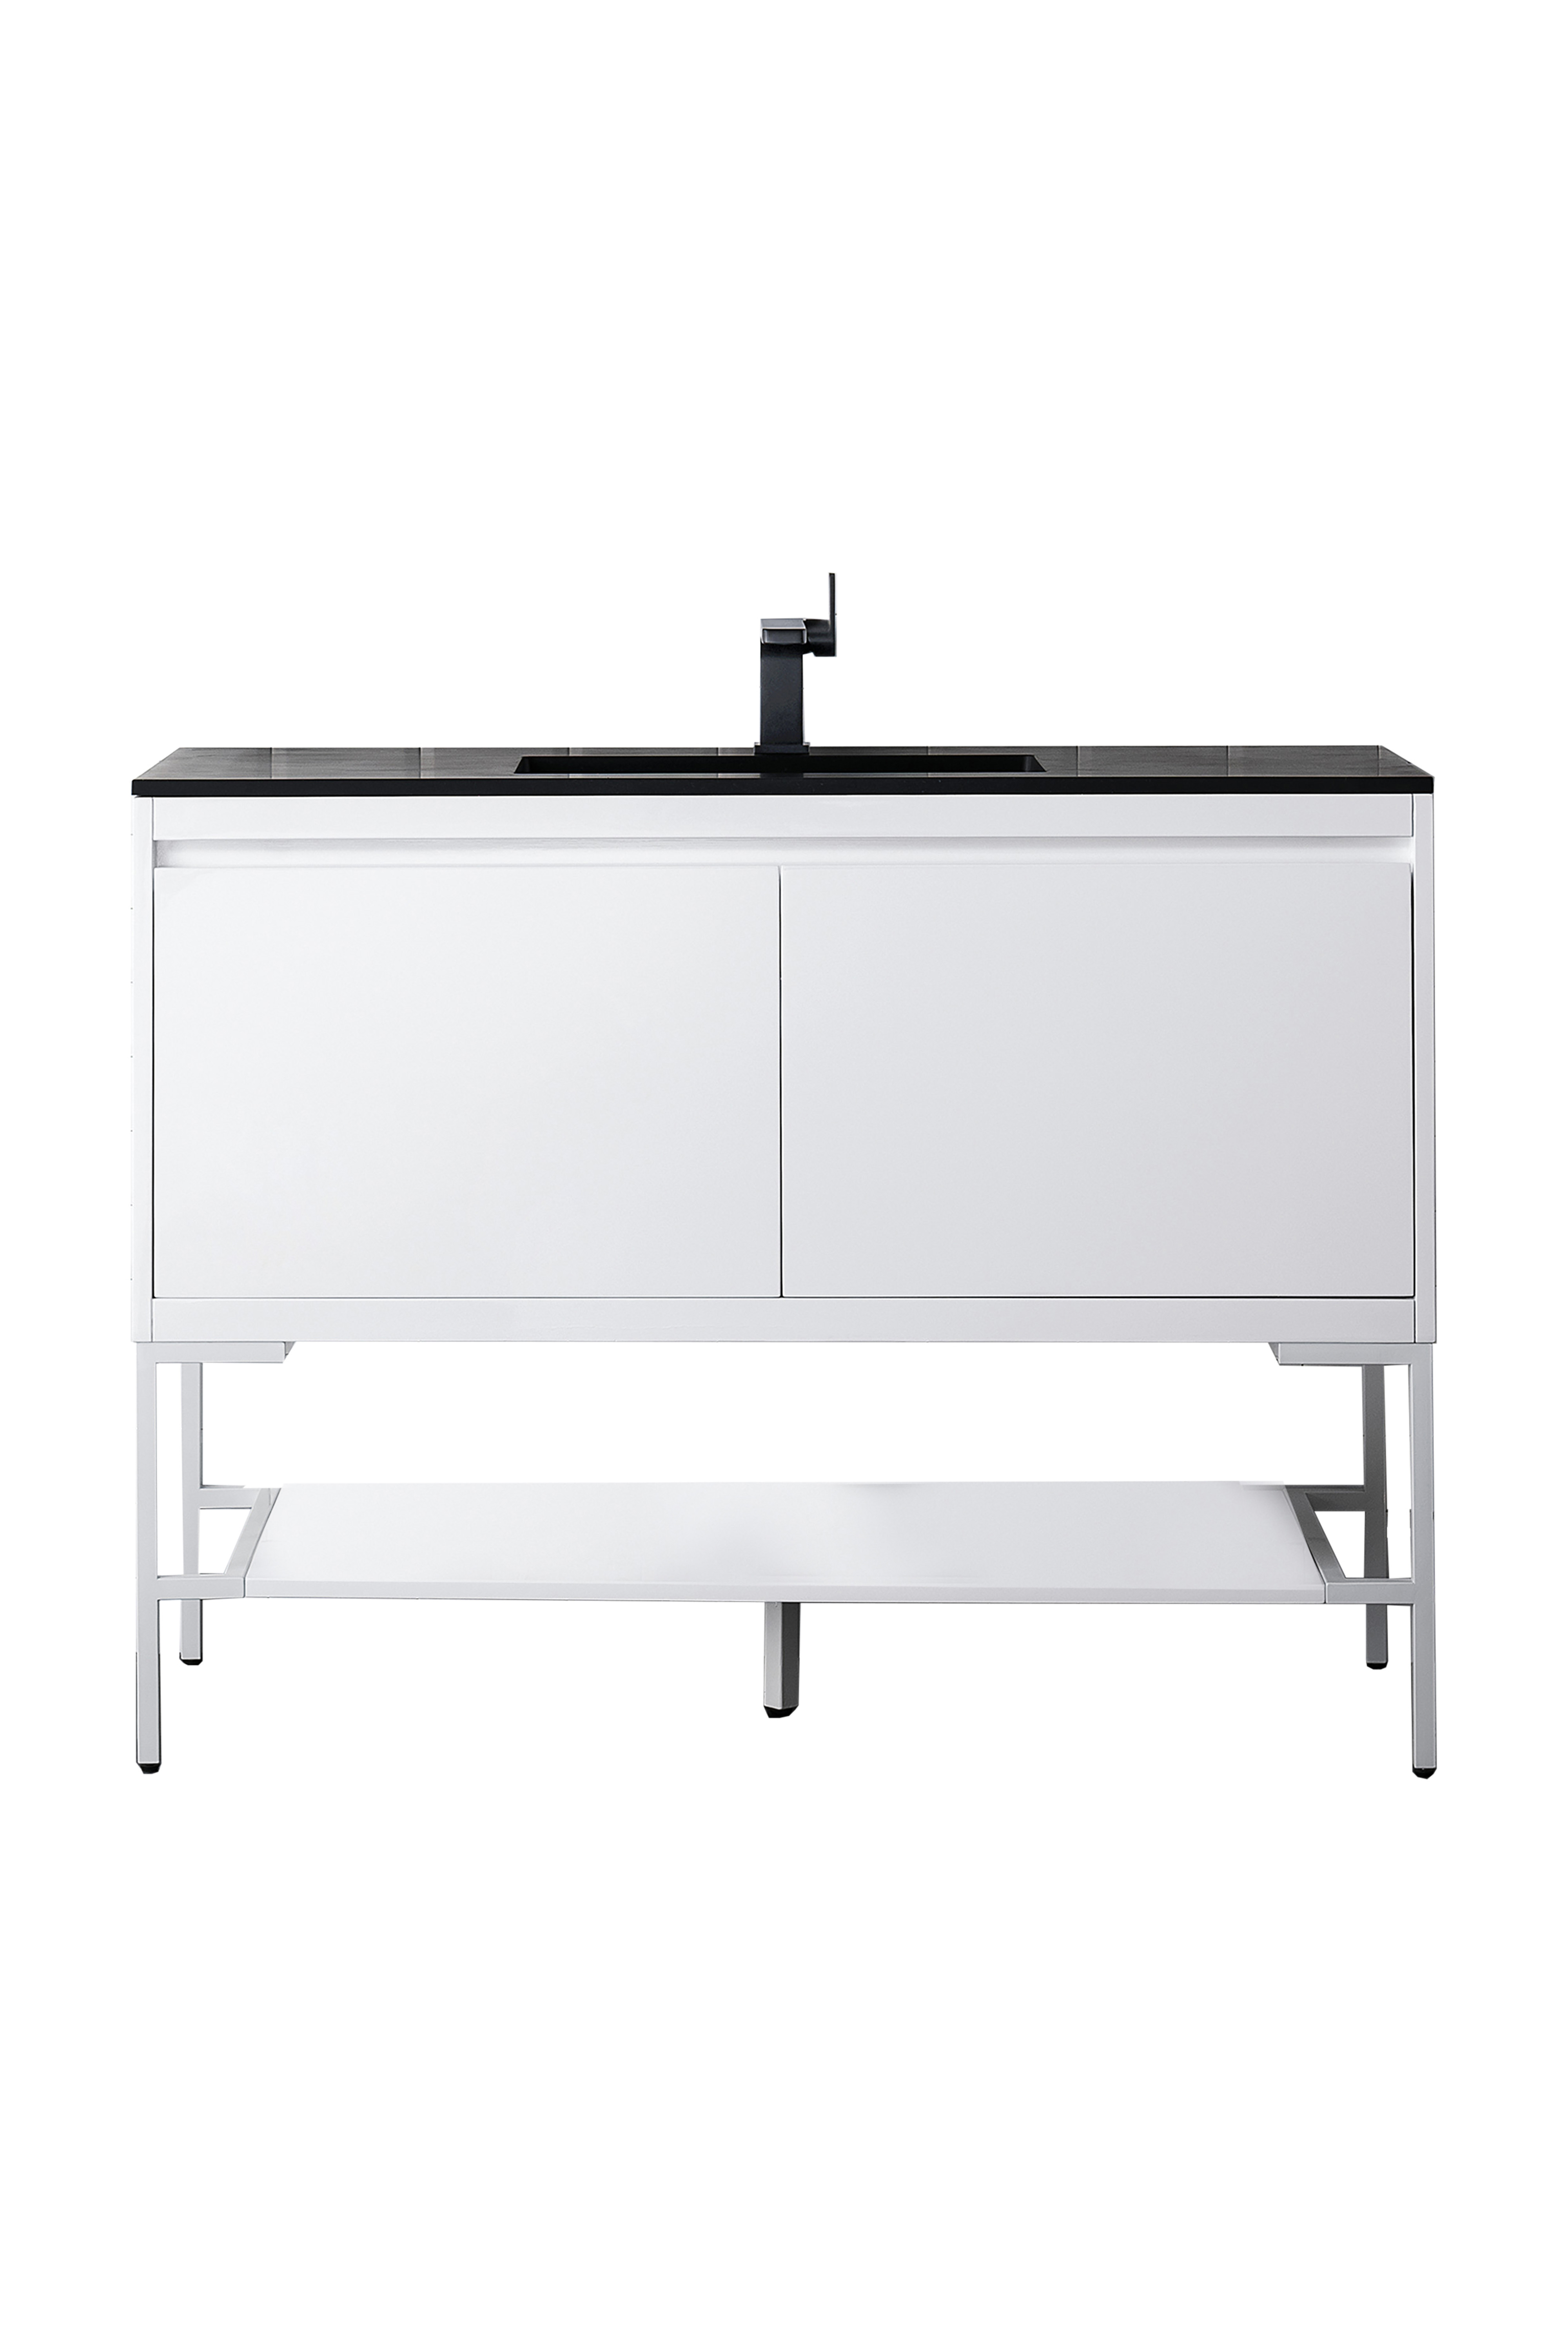 James Martin 801V47.3GWGWCHB Milan 47.3" Single Vanity Cabinet, Glossy White, Glossy White w/Charcoal Black Composite Top